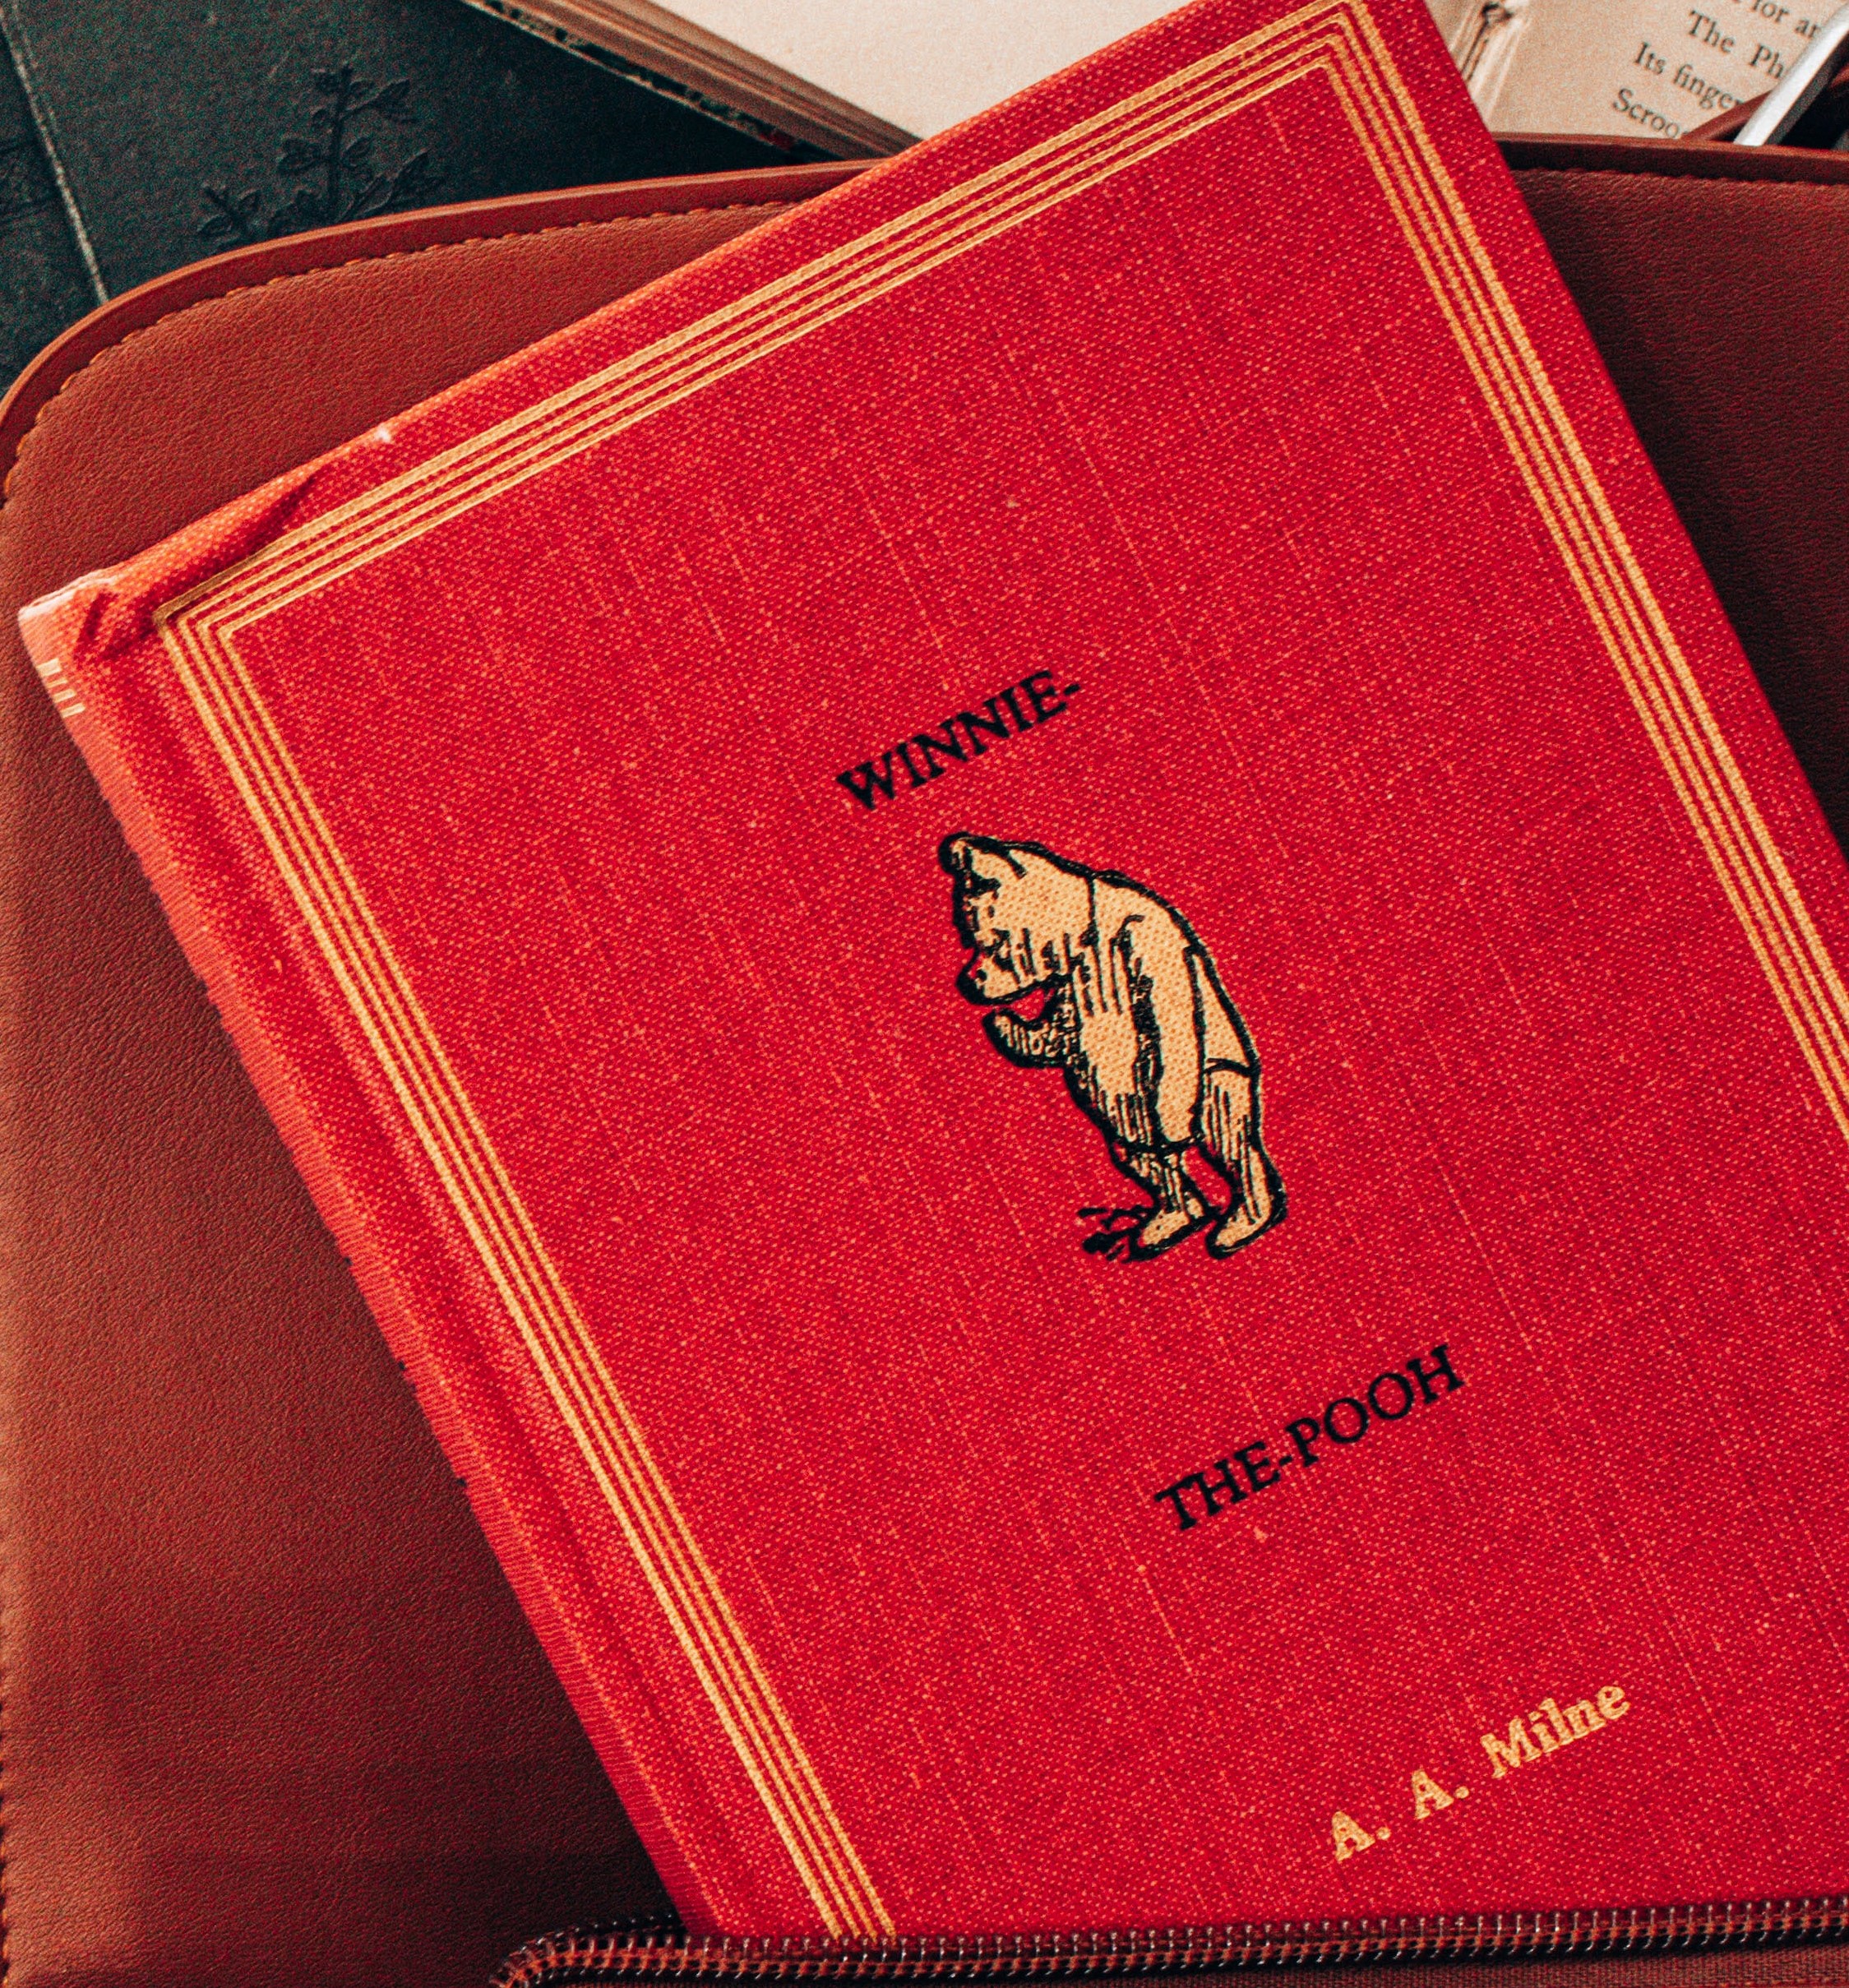 Copy of Winnie the Pooh book inside a leather bag.